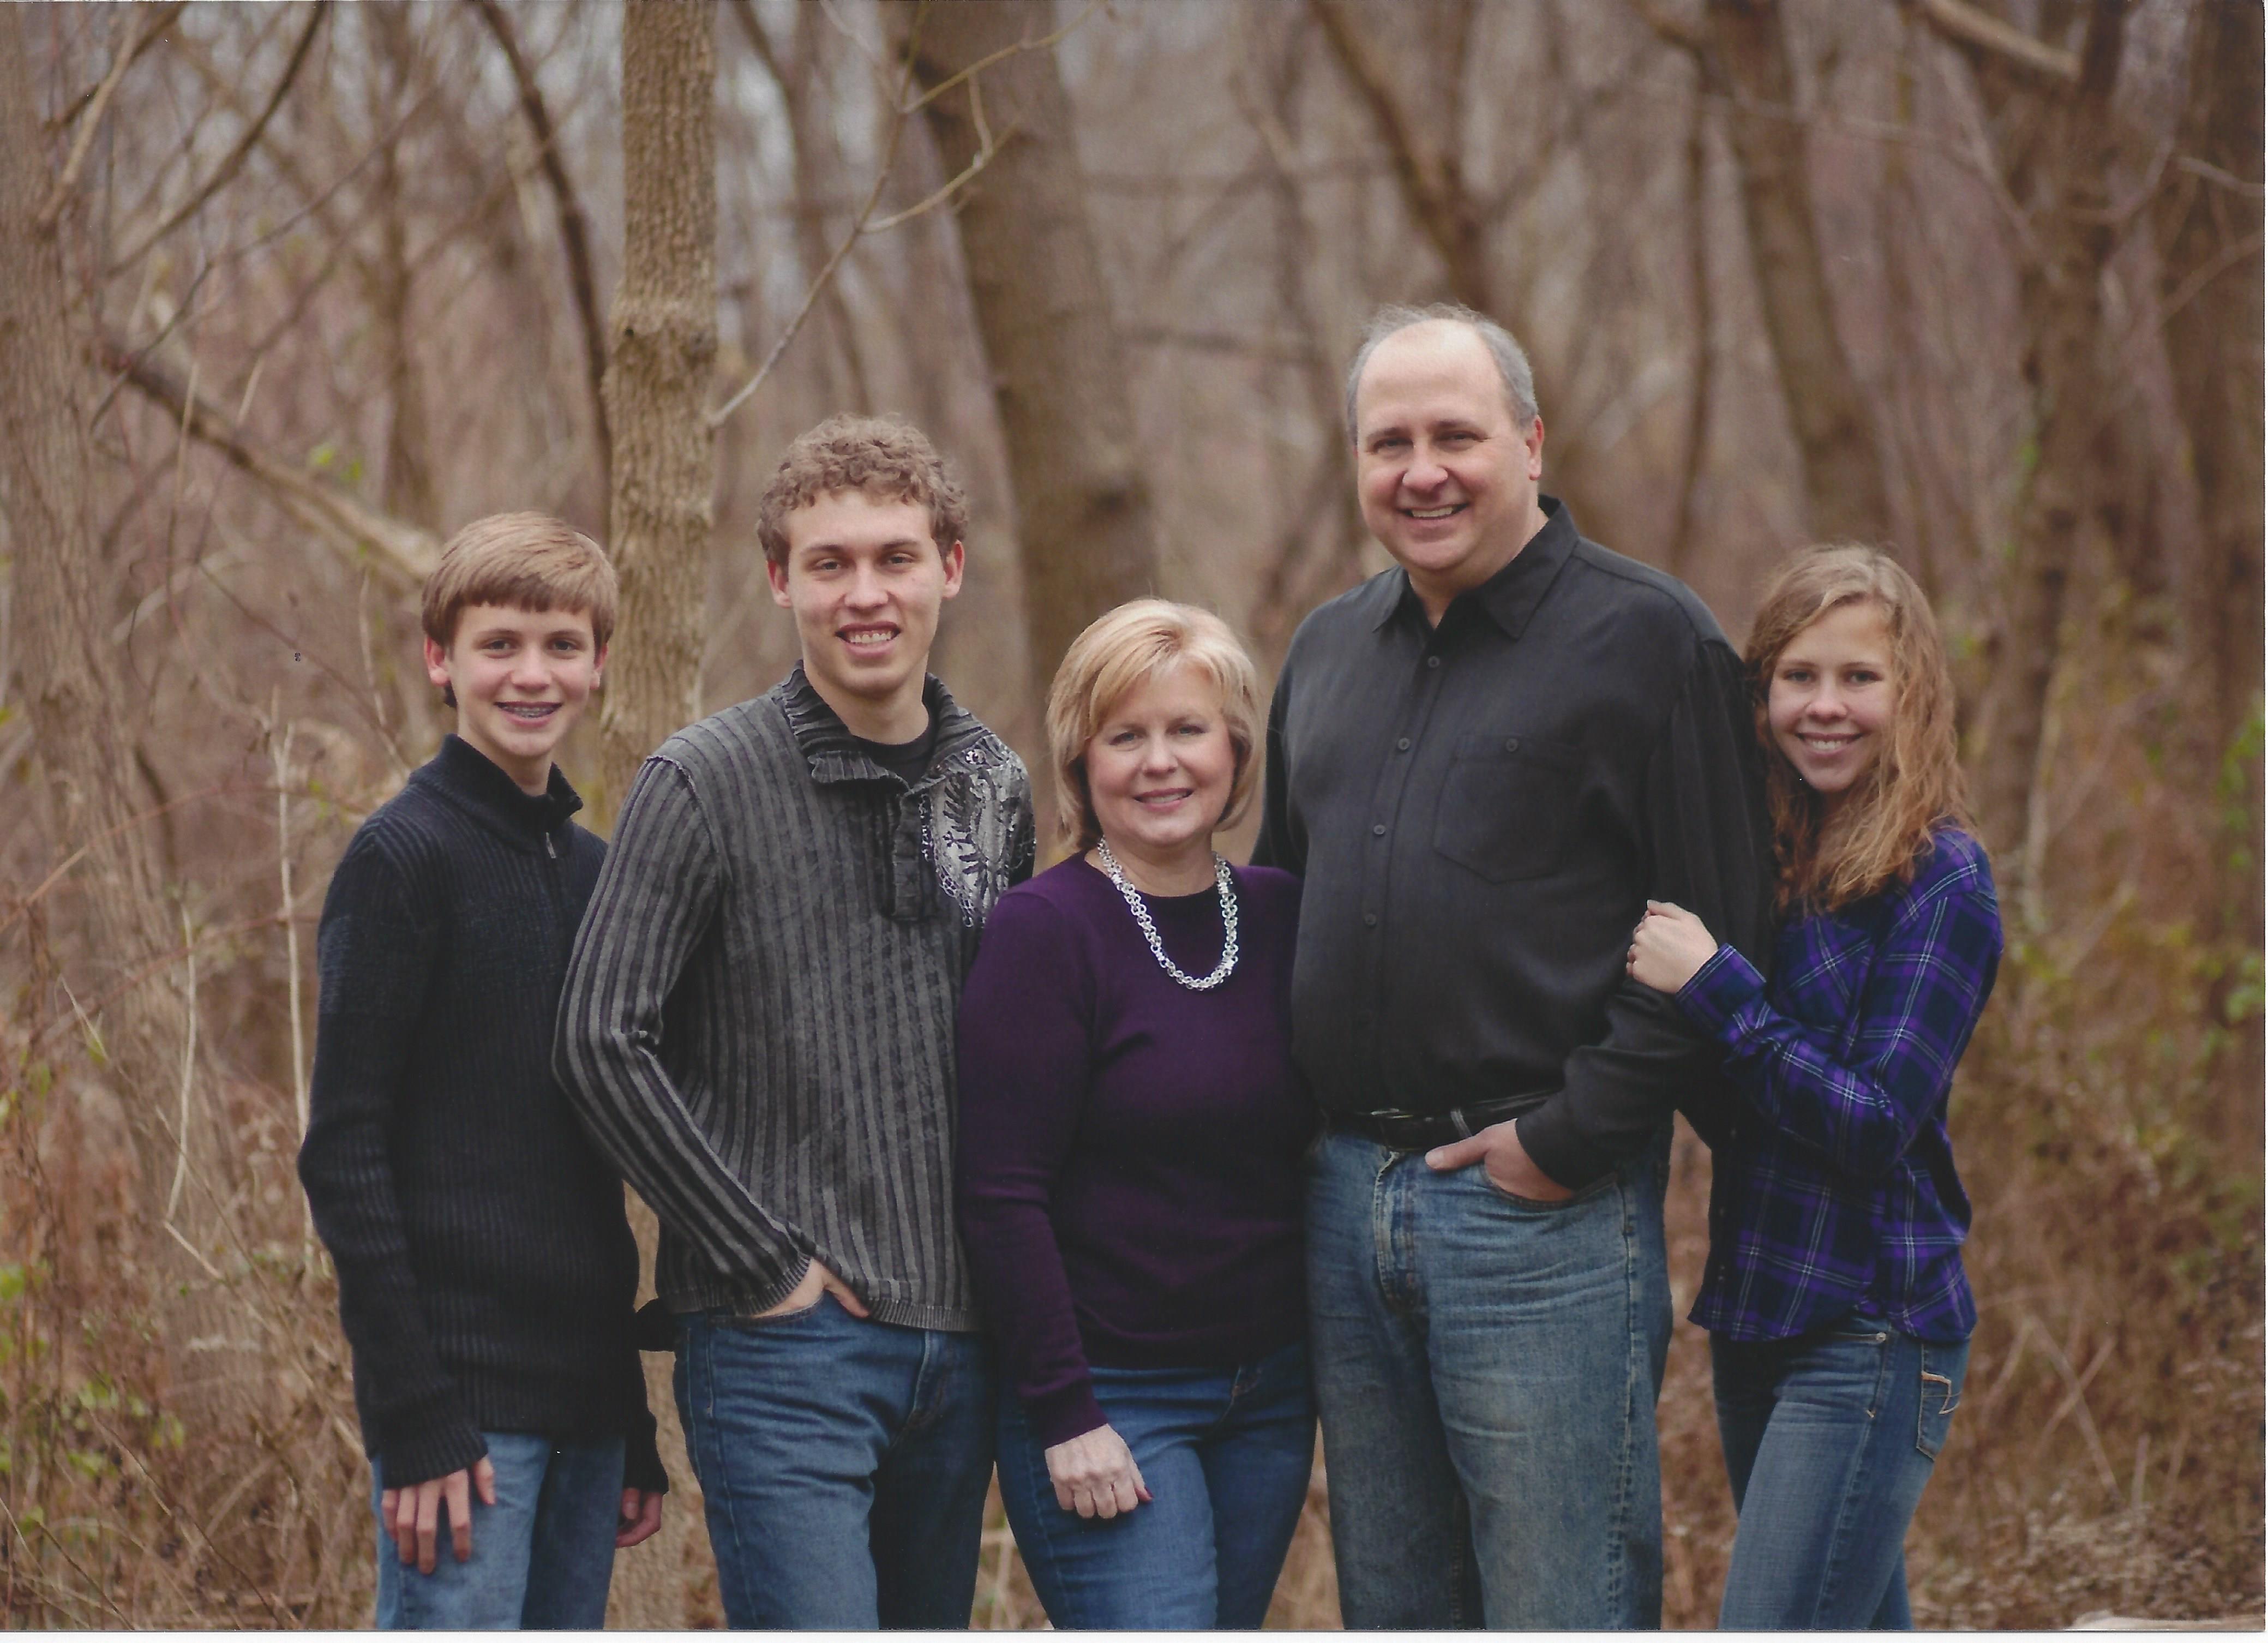 Family of five pose outdoors in front of a wooded scene. Family includes two boys, a woman in a purple top, a man in a gray shirt and a girl.